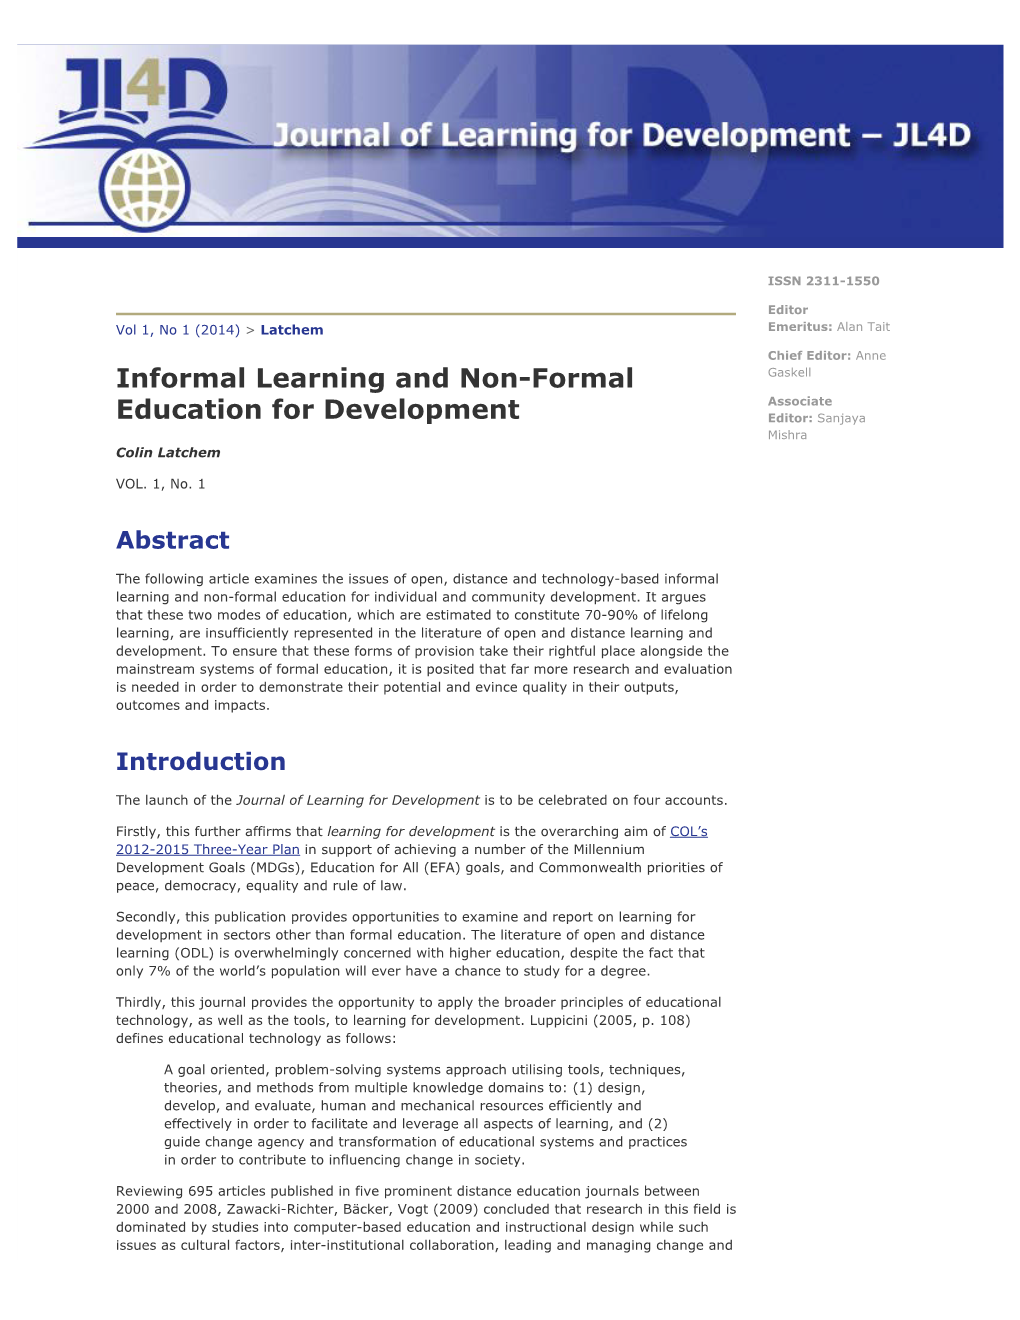 Informal Learning and Non-Formal Education for Development